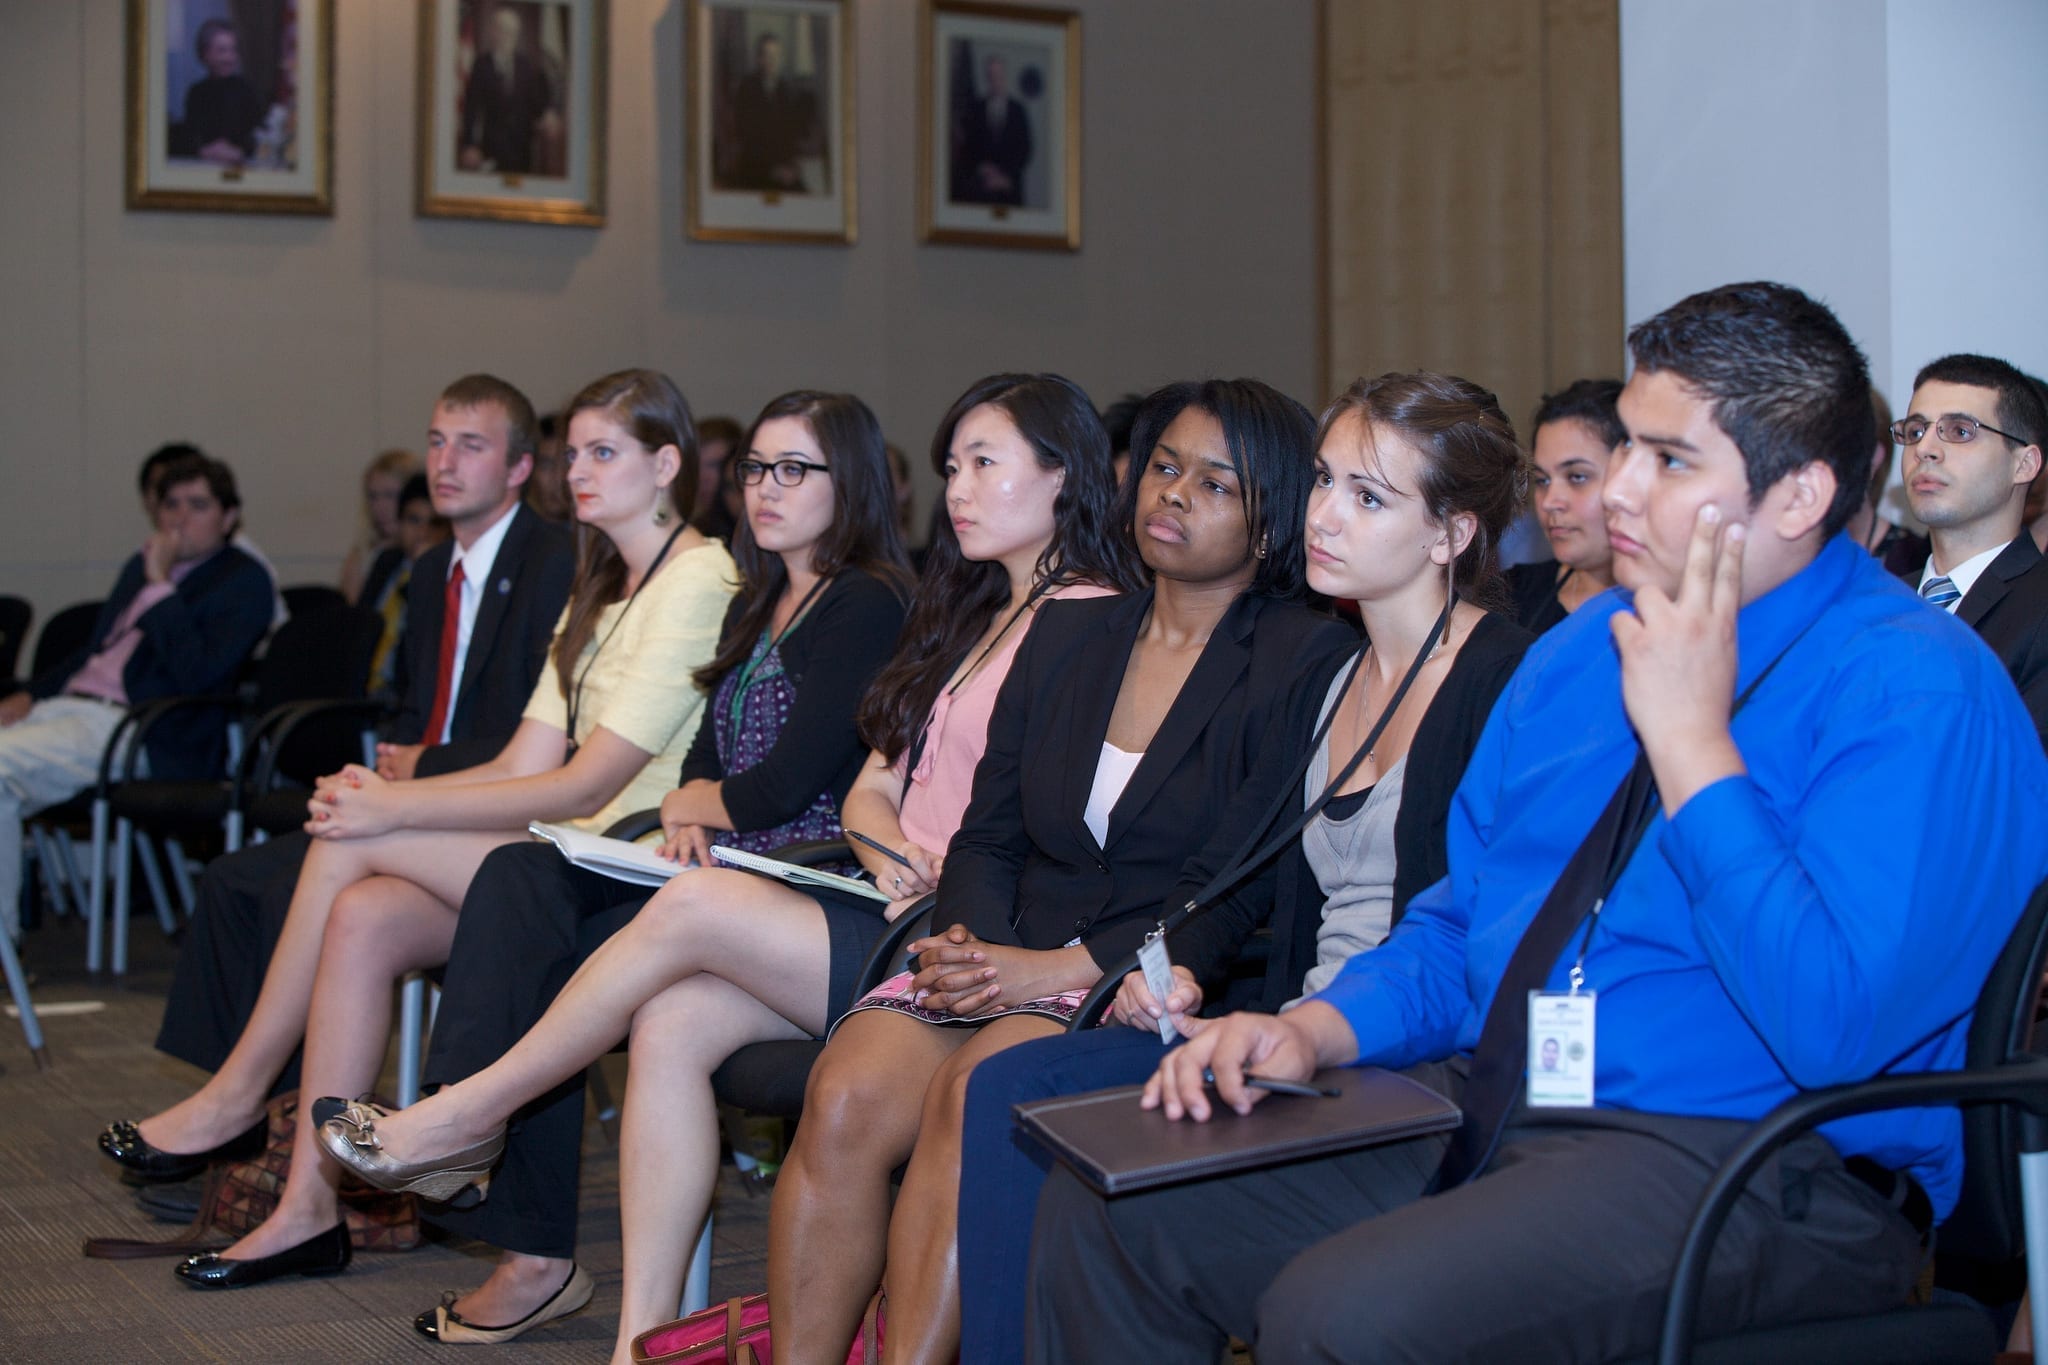 Group of interns; image by U.S. Dept. of Education, via Flickr, CC BY 2.0, no changes.